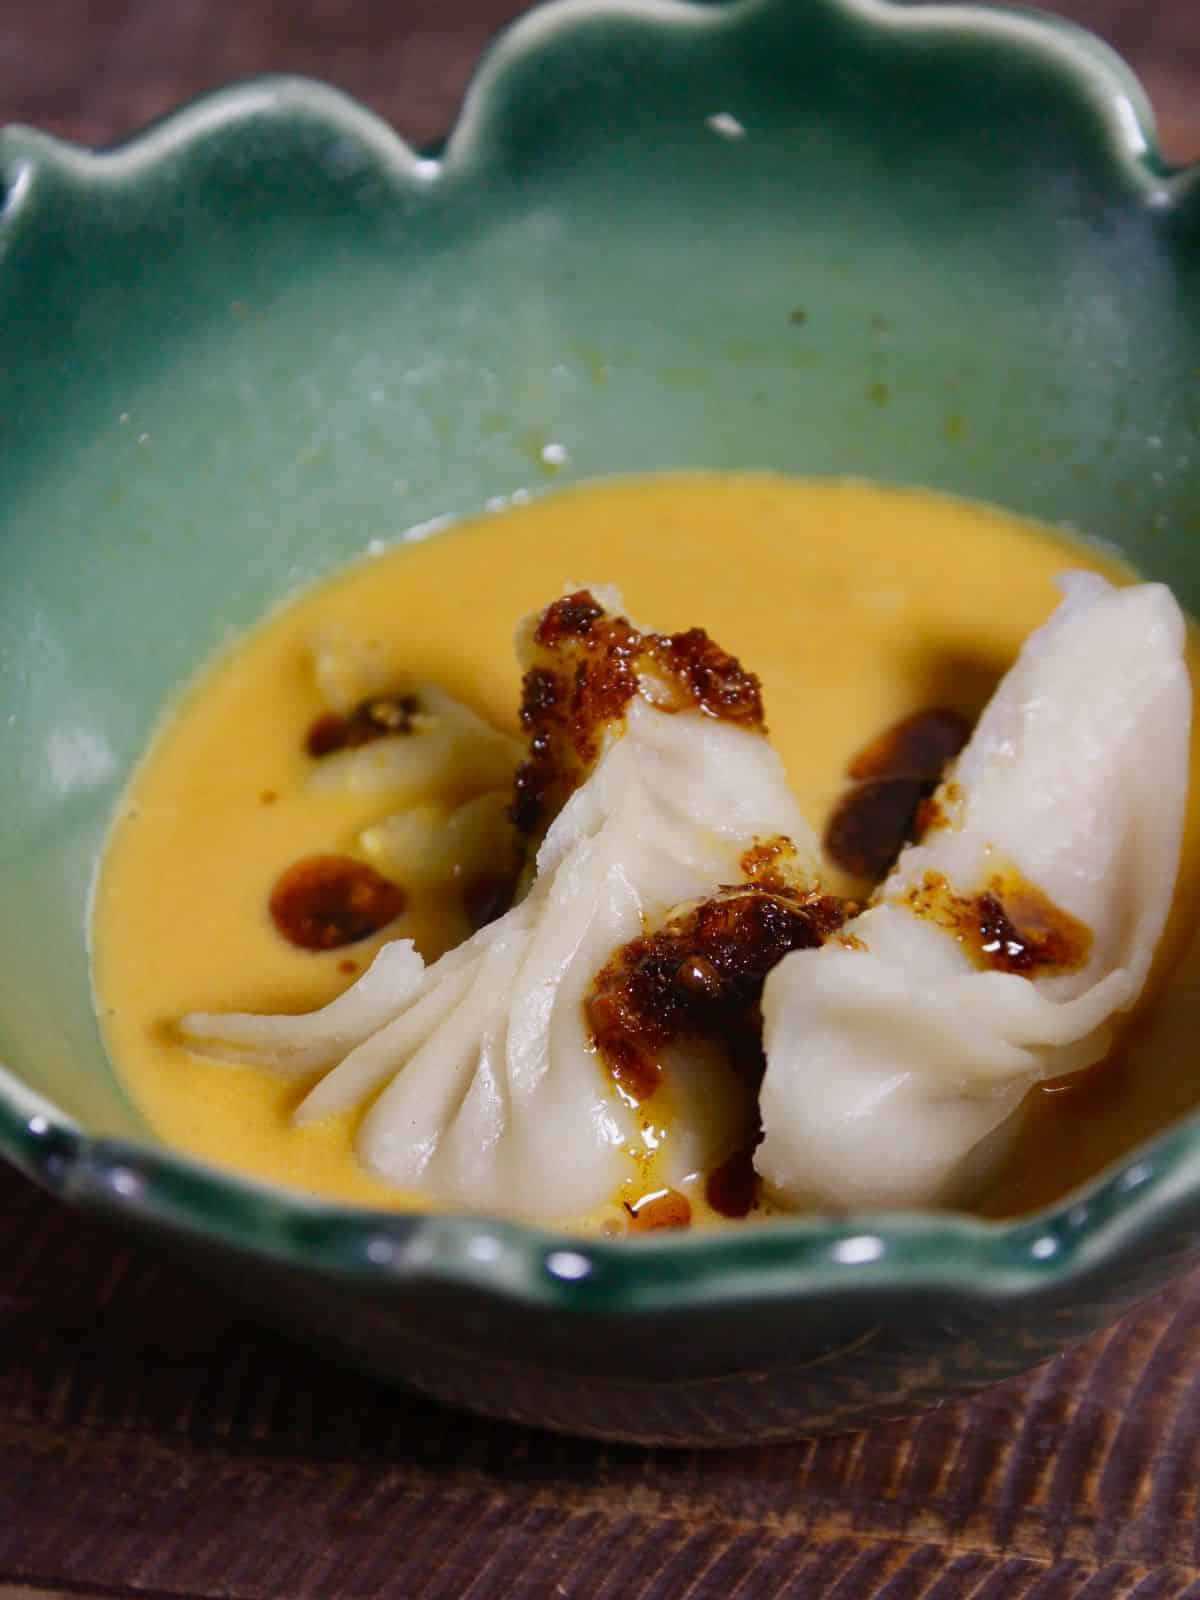 garnish dumplings in peanut sauce with some chili oil and enjoy 